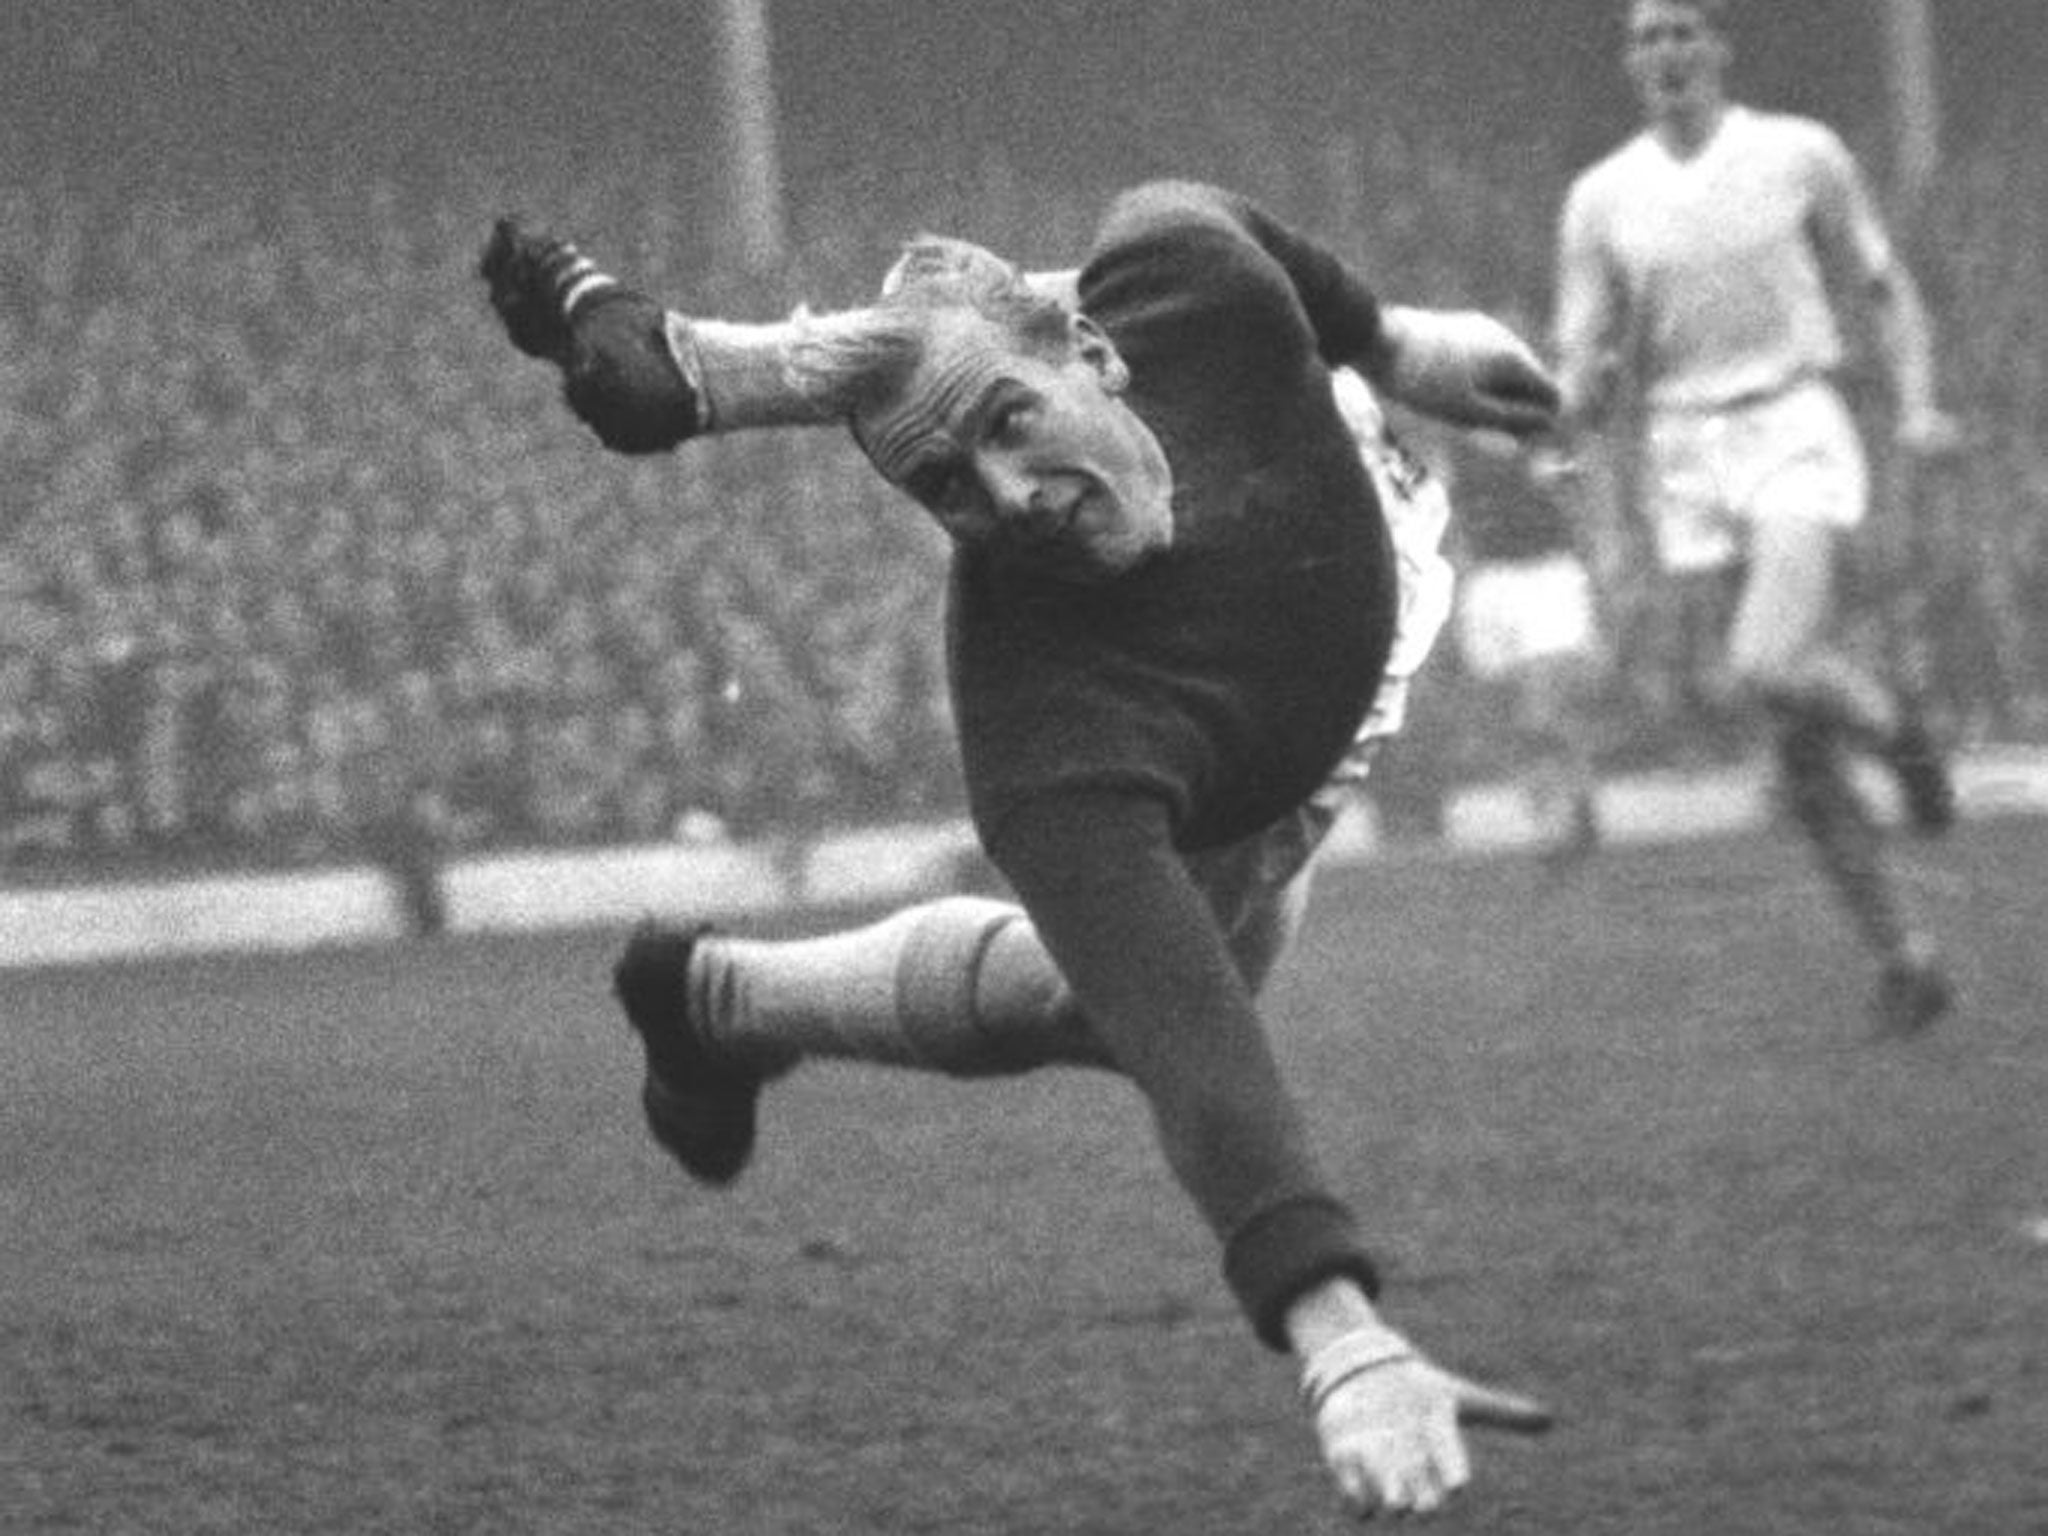 Trautmann in 1959 against West Ham; he had earlier been a rumbustious centre-forward